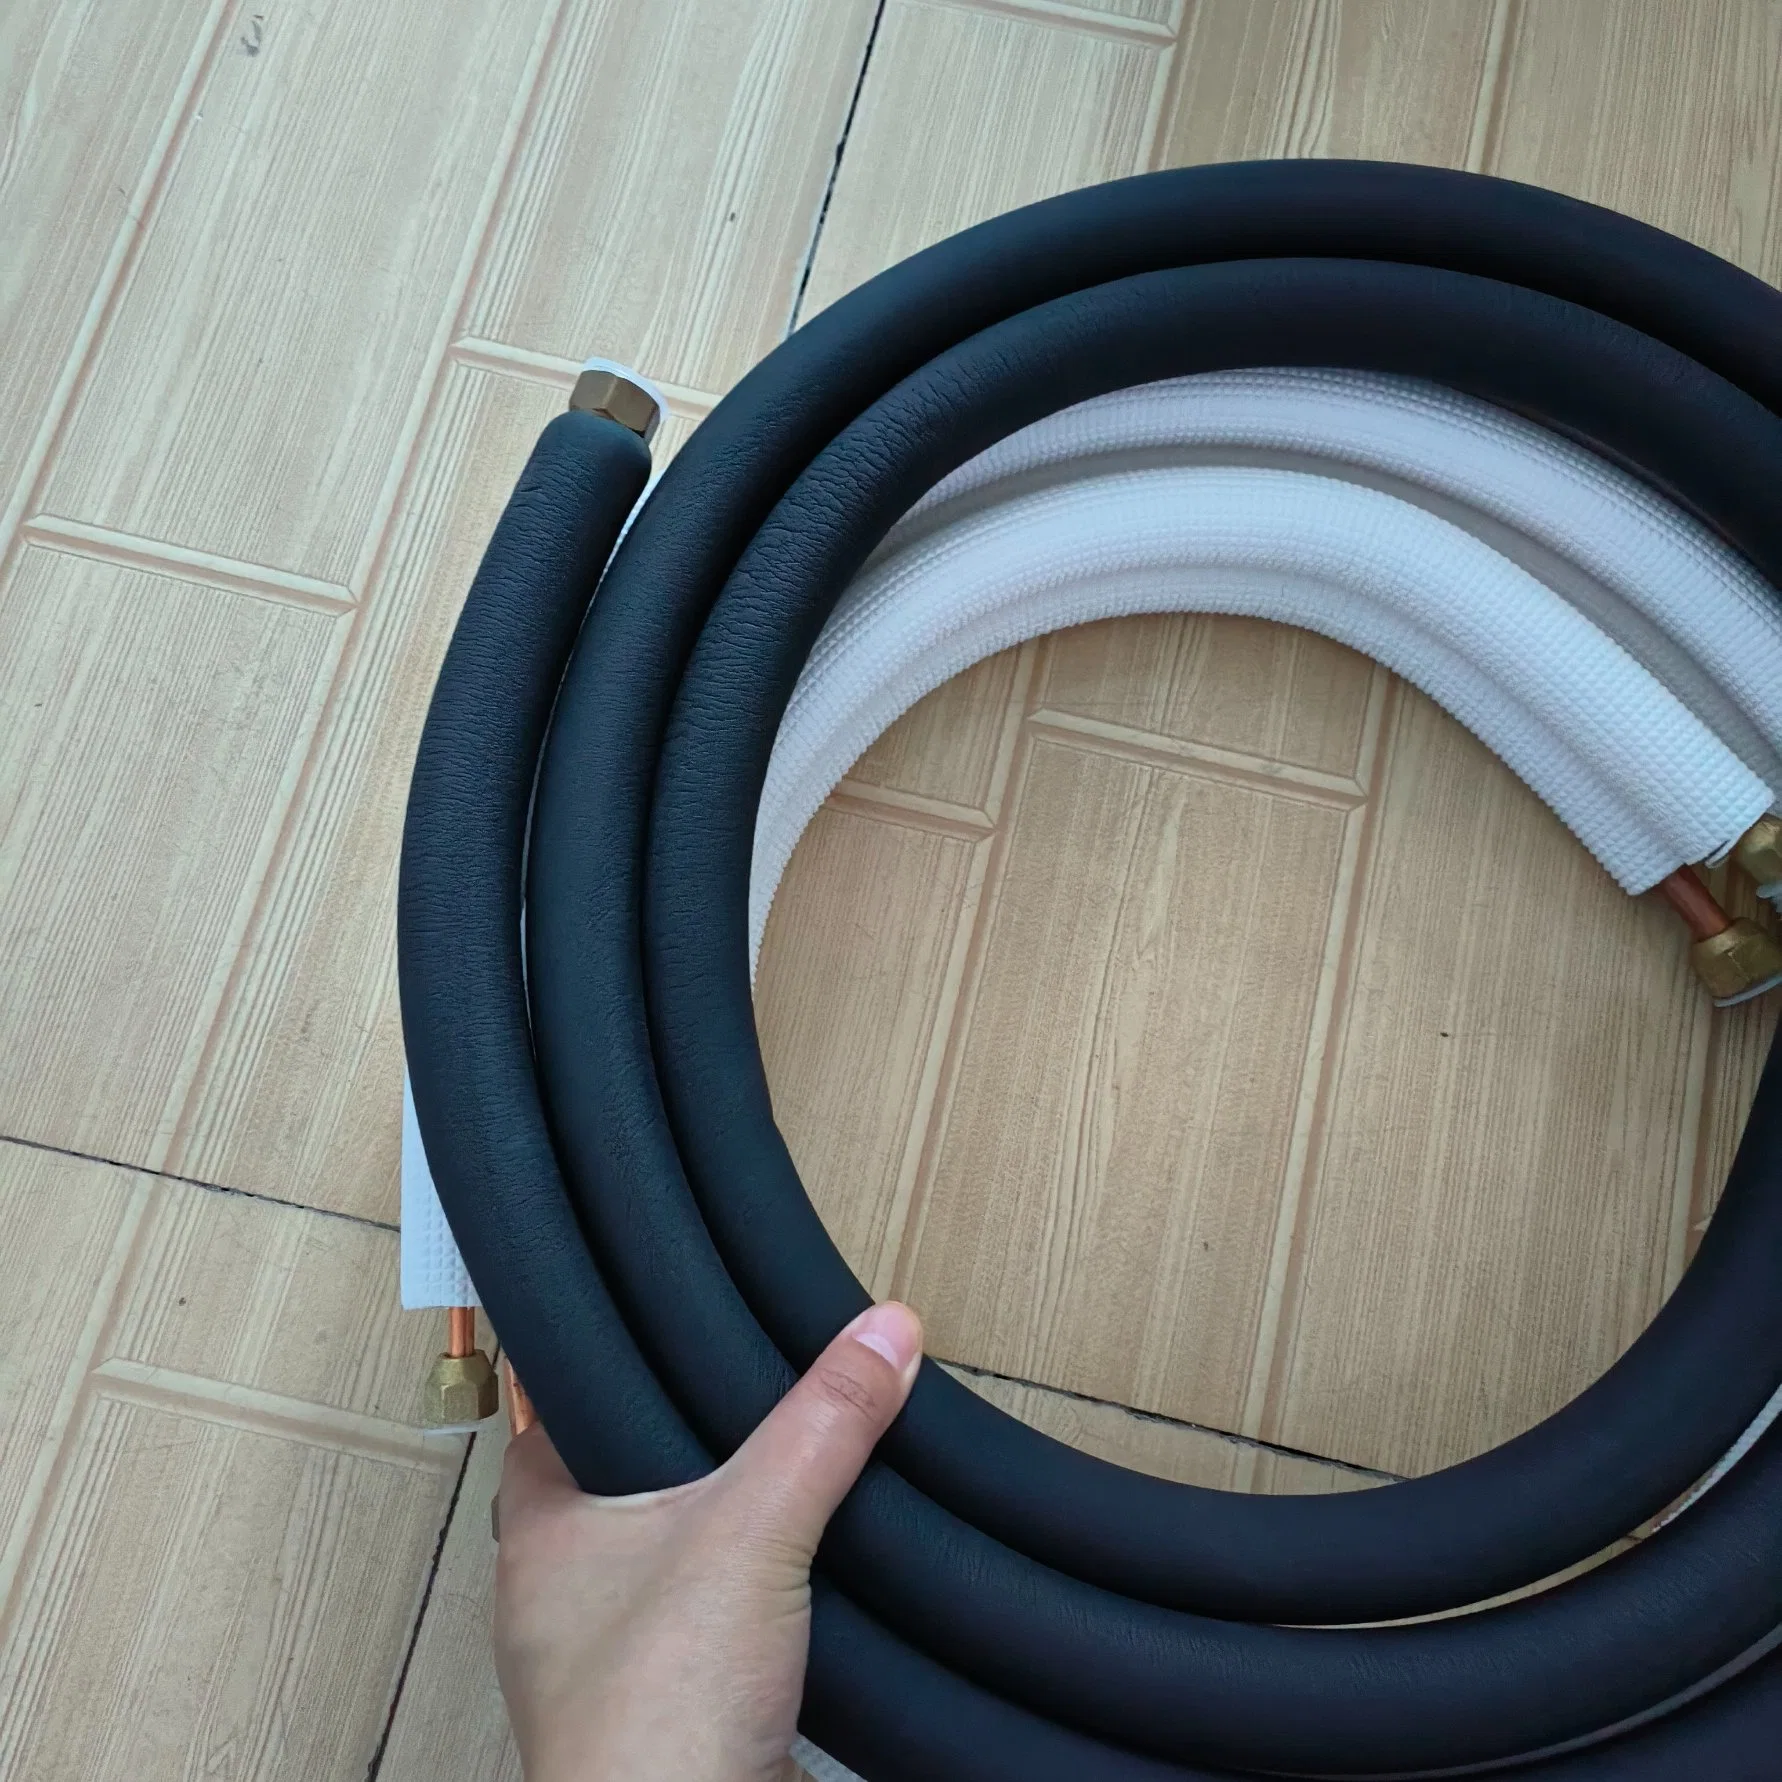 Air Conditioner Parts for Copper Pipe Insulation Air Conditioning / Copper-Aluminum Connecting Pipe